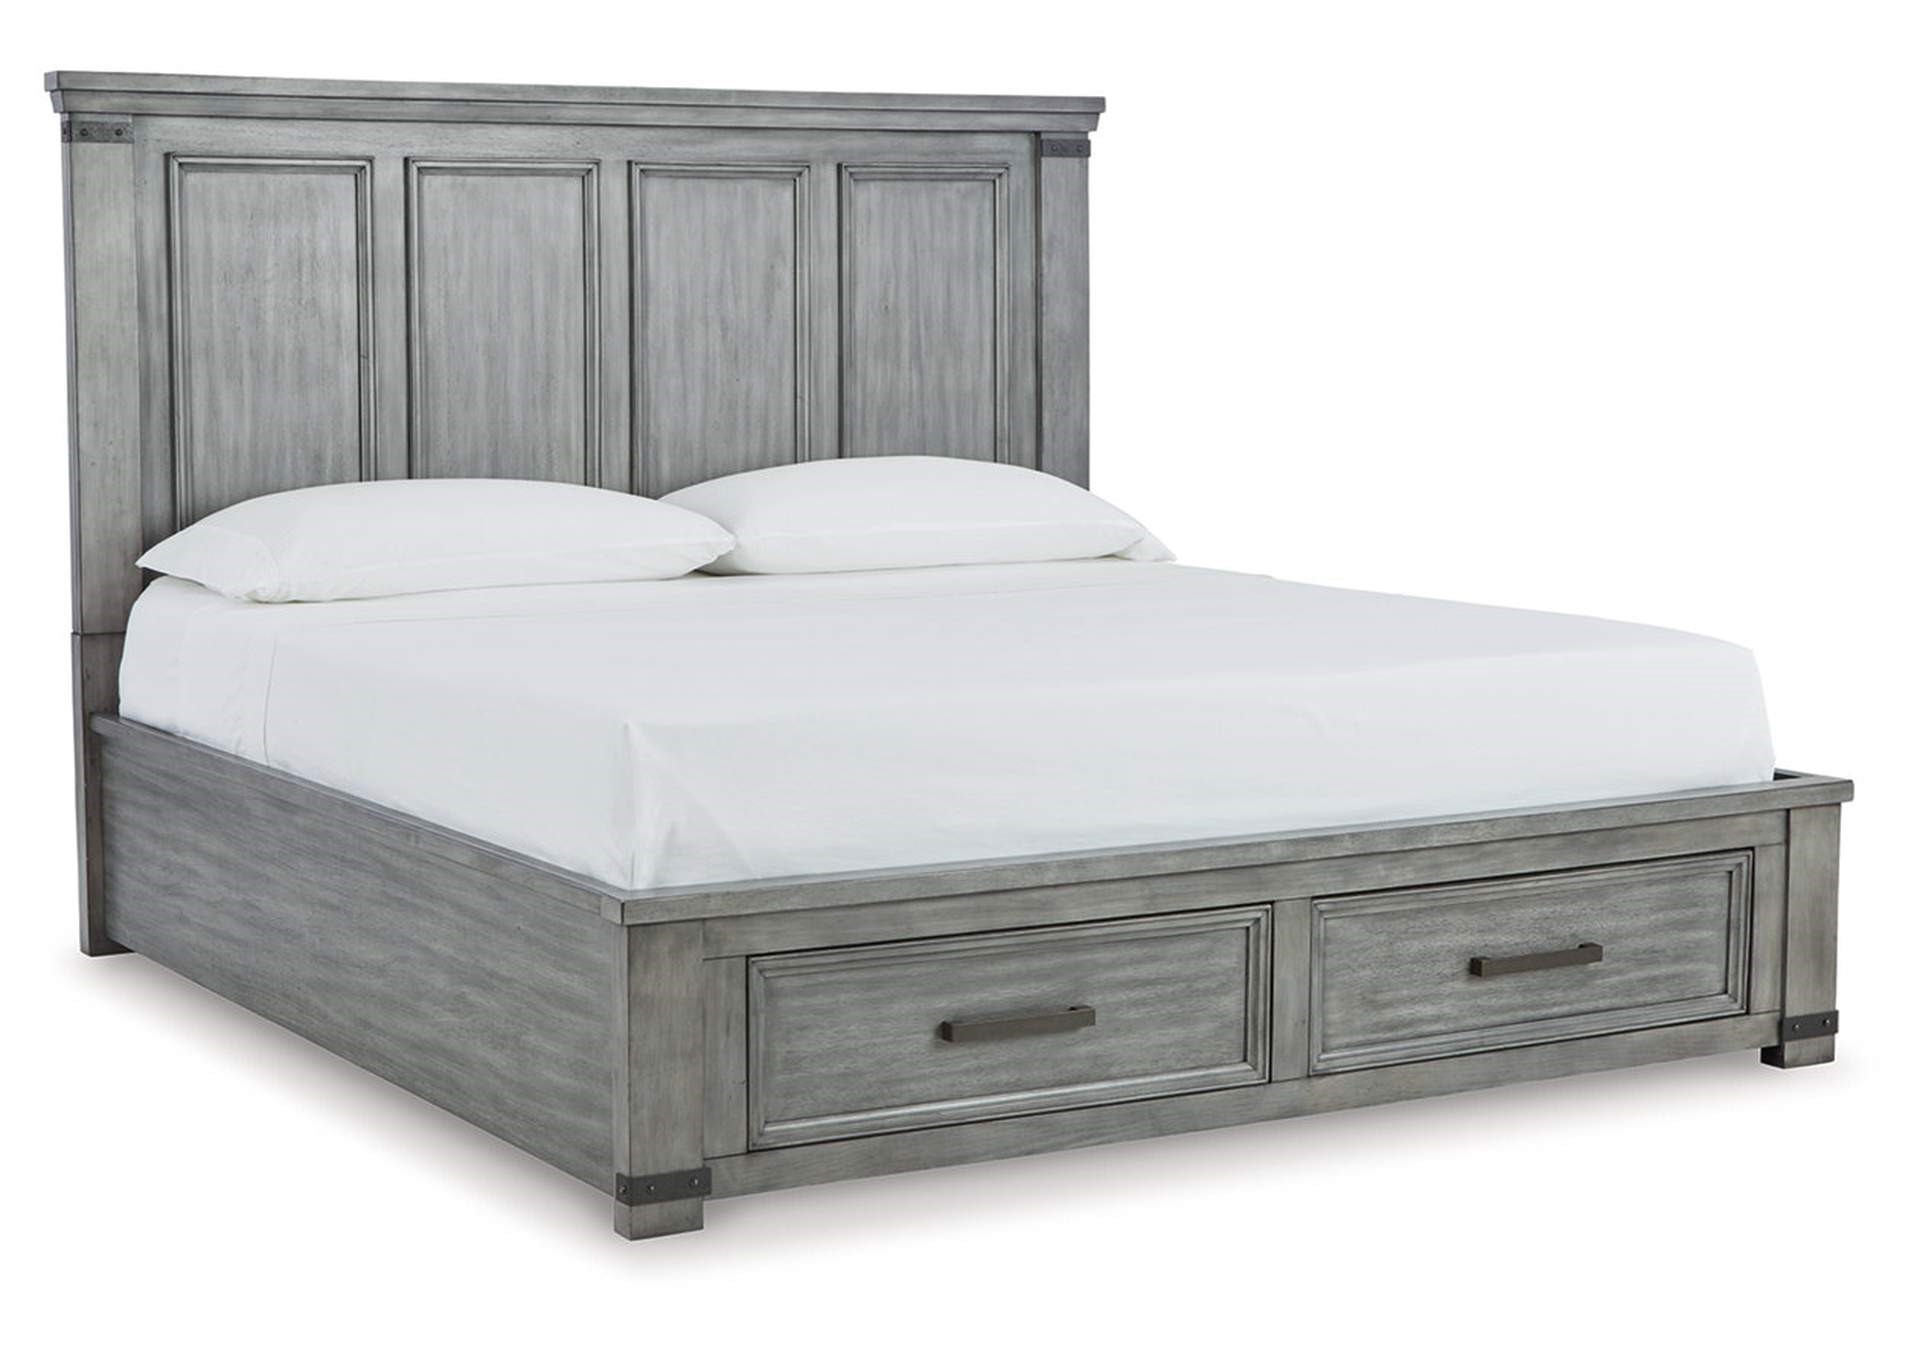 How Does a King Storage Bed Compare to Other Storage Bed Options?